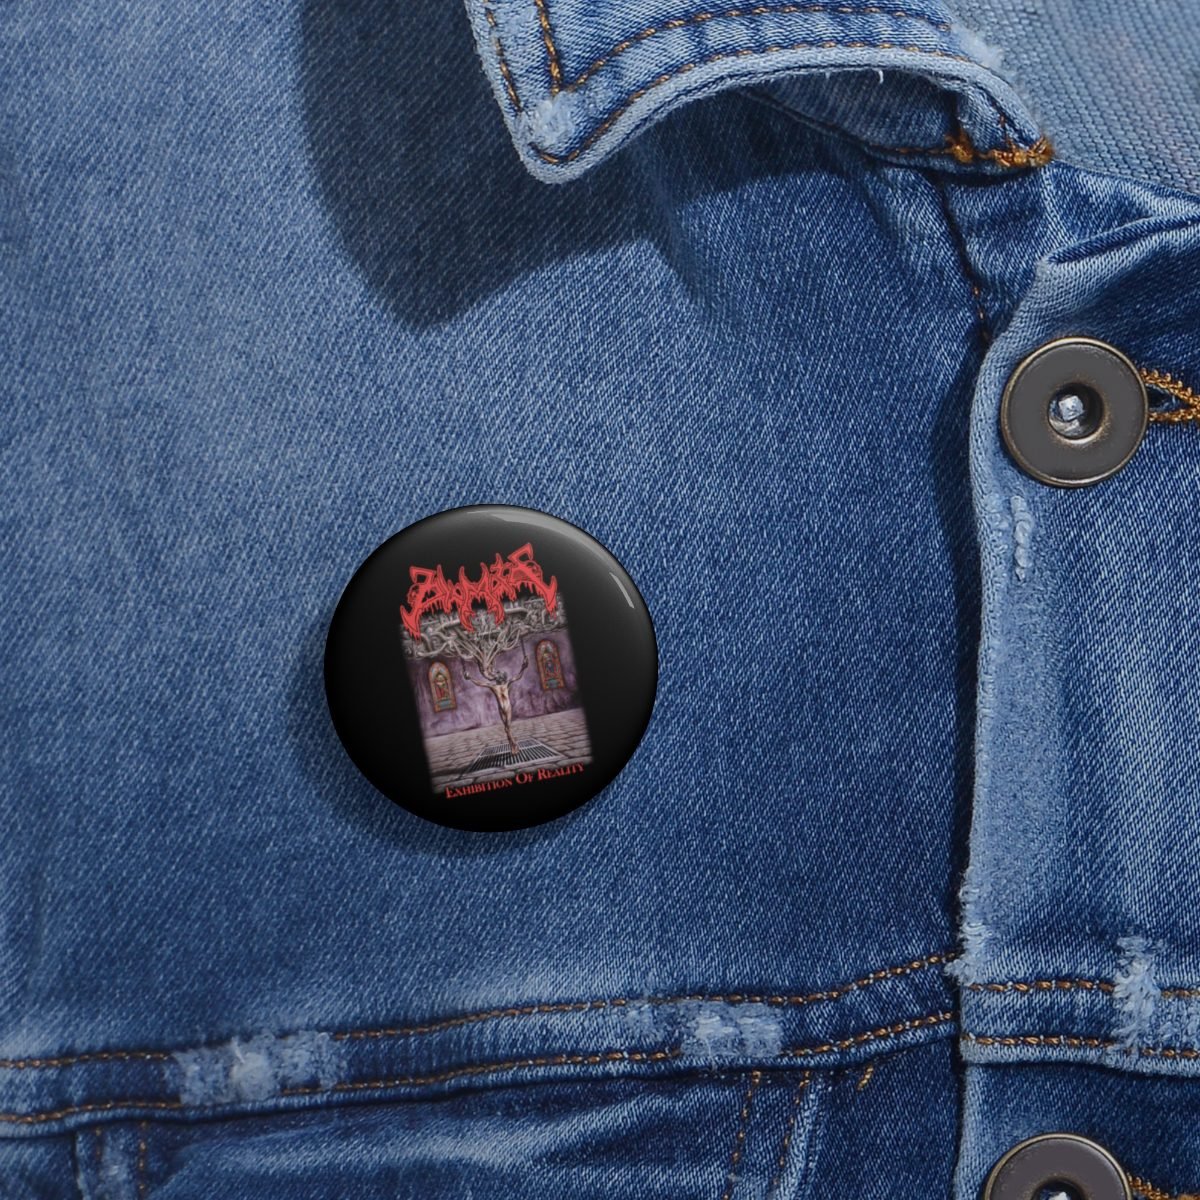 Diamoth – Exhibition of Reality Pin Buttons